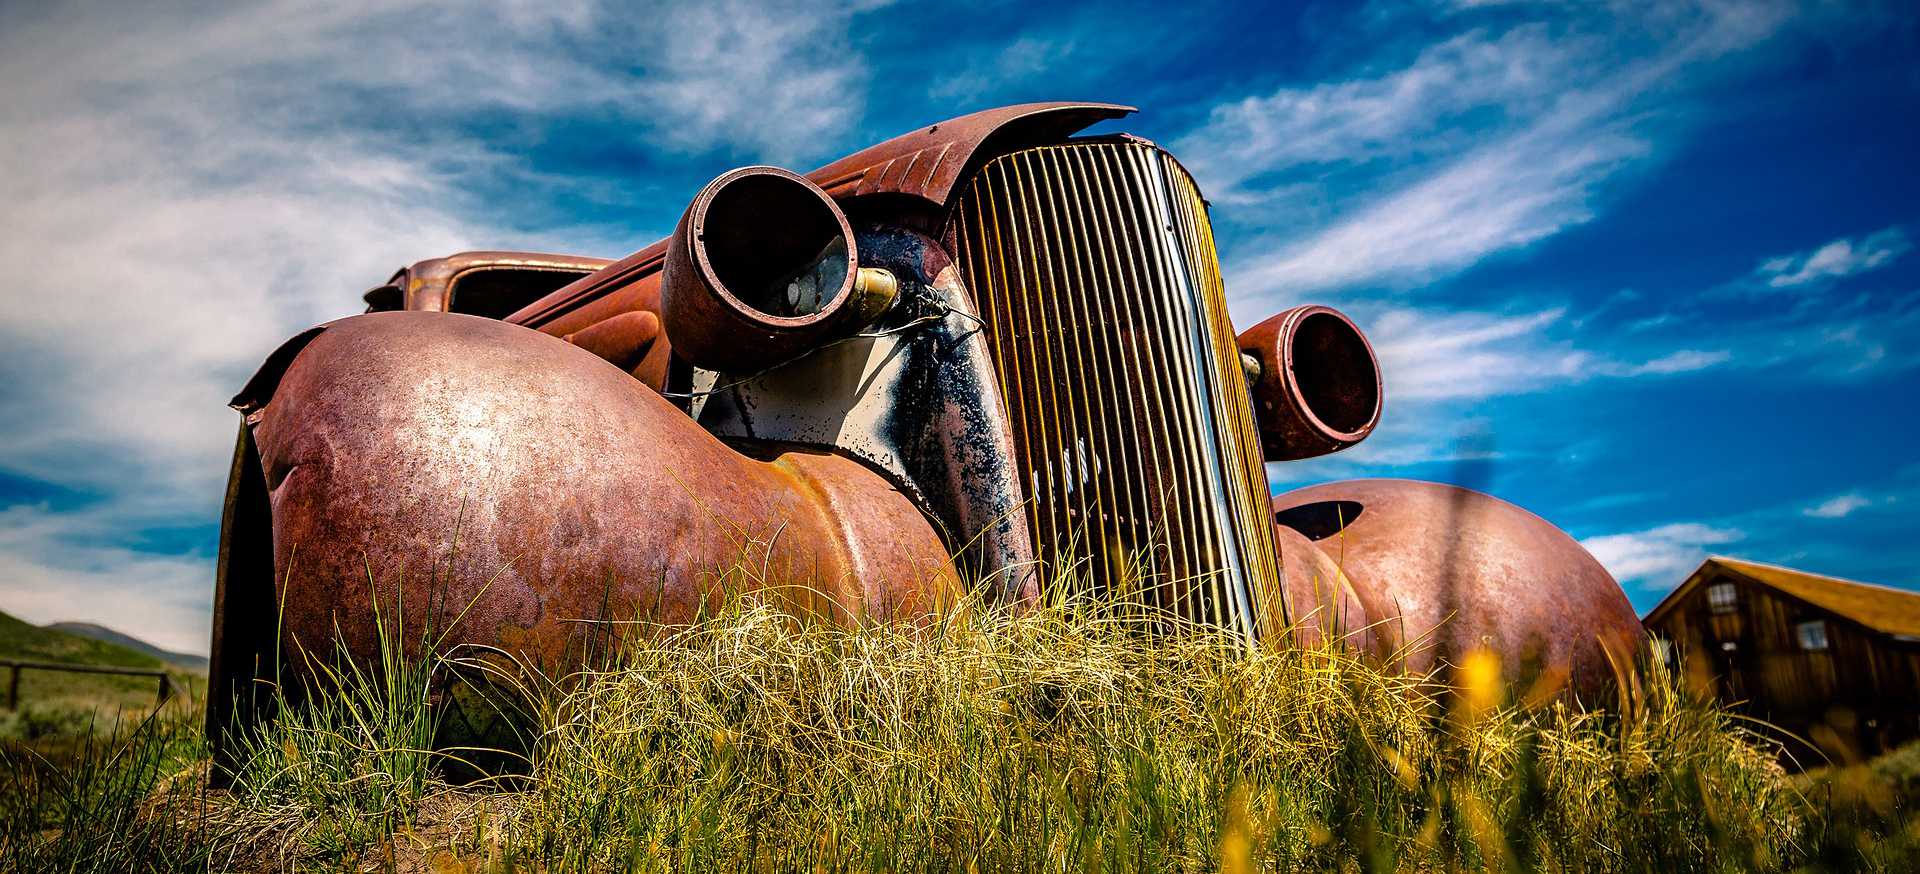 Old Rusted Car in Texas | Breast Cancer Car Donations